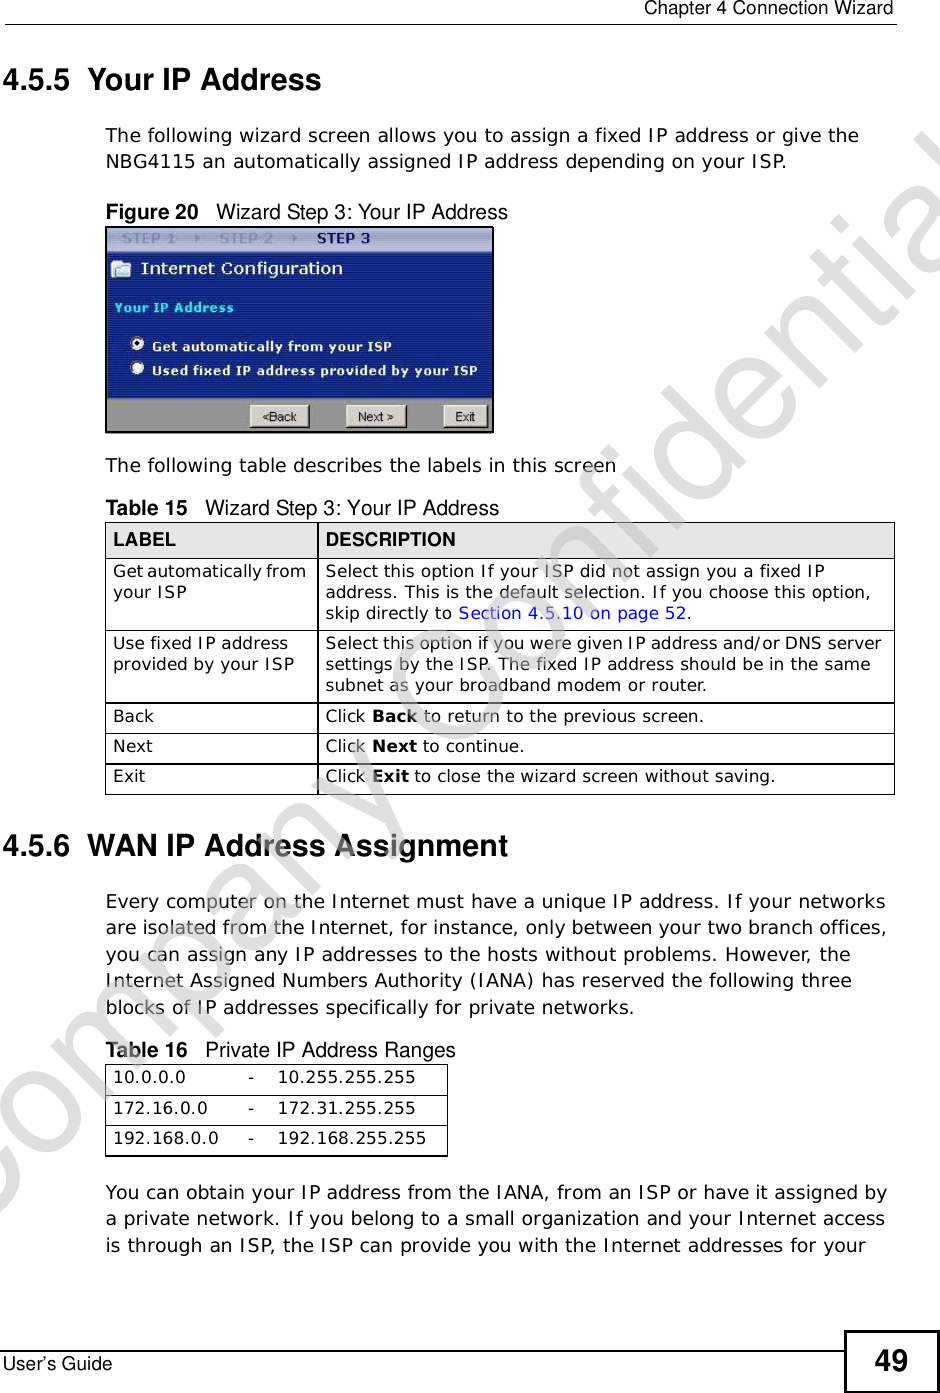  Chapter 4Connection WizardUser’s Guide 494.5.5  Your IP AddressThe following wizard screen allows you to assign a fixed IP address or give the NBG4115 an automatically assigned IP address depending on your ISP.Figure 20   Wizard Step 3: Your IP AddressThe following table describes the labels in this screen4.5.6  WAN IP Address AssignmentEvery computer on the Internet must have a unique IP address. If your networks are isolated from the Internet, for instance, only between your two branch offices, you can assign any IP addresses to the hosts without problems. However, the Internet Assigned Numbers Authority (IANA) has reserved the following three blocks of IP addresses specifically for private networks.You can obtain your IP address from the IANA, from an ISP or have it assigned by a private network. If you belong to a small organization and your Internet access is through an ISP, the ISP can provide you with the Internet addresses for your Table 15   Wizard Step 3: Your IP AddressLABEL DESCRIPTIONGet automatically from your ISP  Select this option If your ISP did not assign you a fixed IP address. This is the default selection. If you choose this option, skip directly to Section 4.5.10 on page 52.Use fixed IP address provided by your ISP Select this option if you were given IP address and/or DNS server settings by the ISP. The fixed IP address should be in the same subnet as your broadband modem or router. Back Click Back to return to the previous screen.Next Click Next to continue. Exit Click Exit to close the wizard screen without saving.Table 16   Private IP Address Ranges10.0.0.0 - 10.255.255.255172.16.0.0 - 172.31.255.255192.168.0.0 - 192.168.255.255Company Confidential